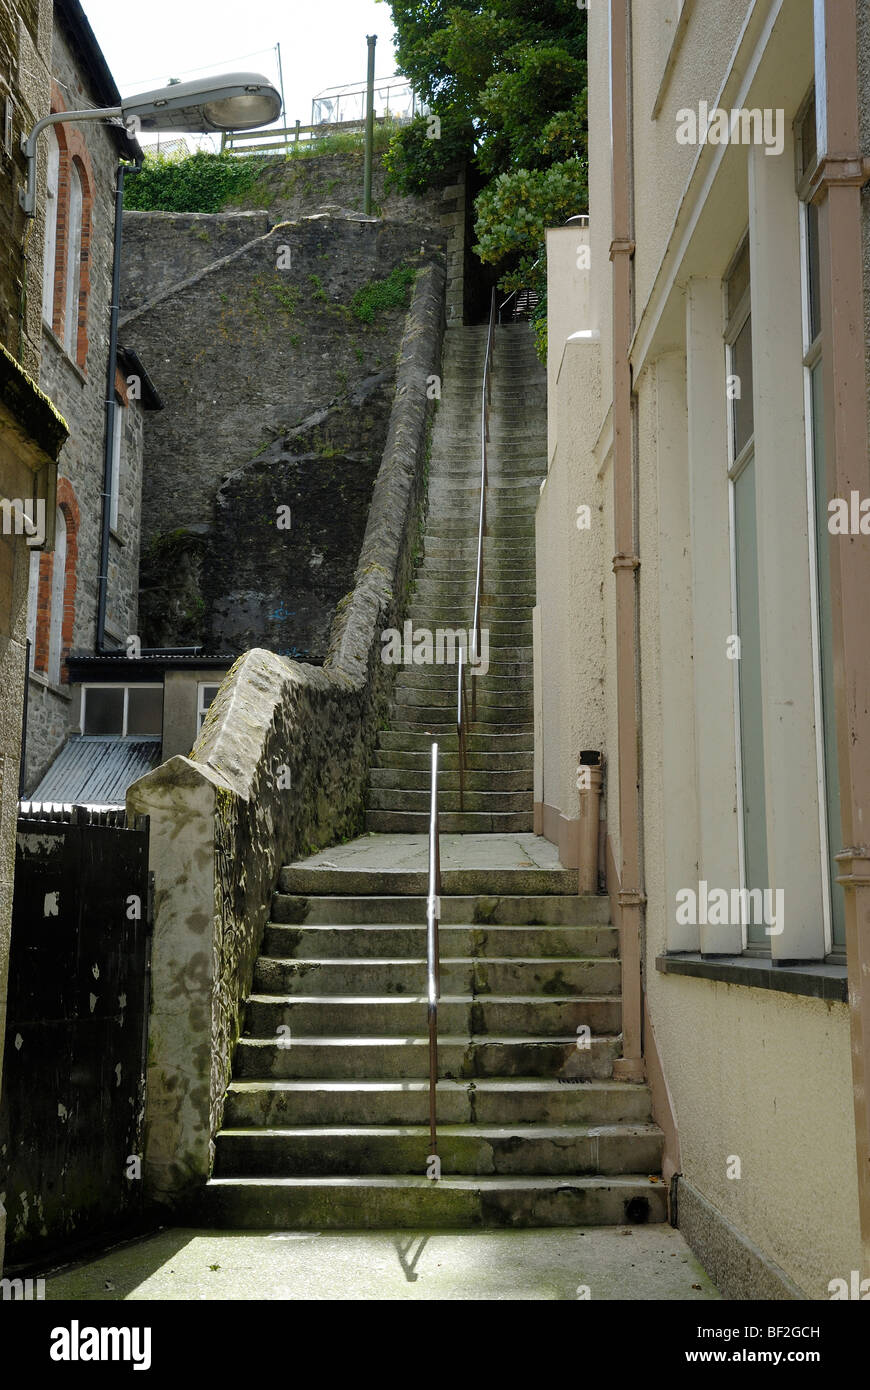 Jacobs ladder Schritte in Falmouth UK Stockfoto